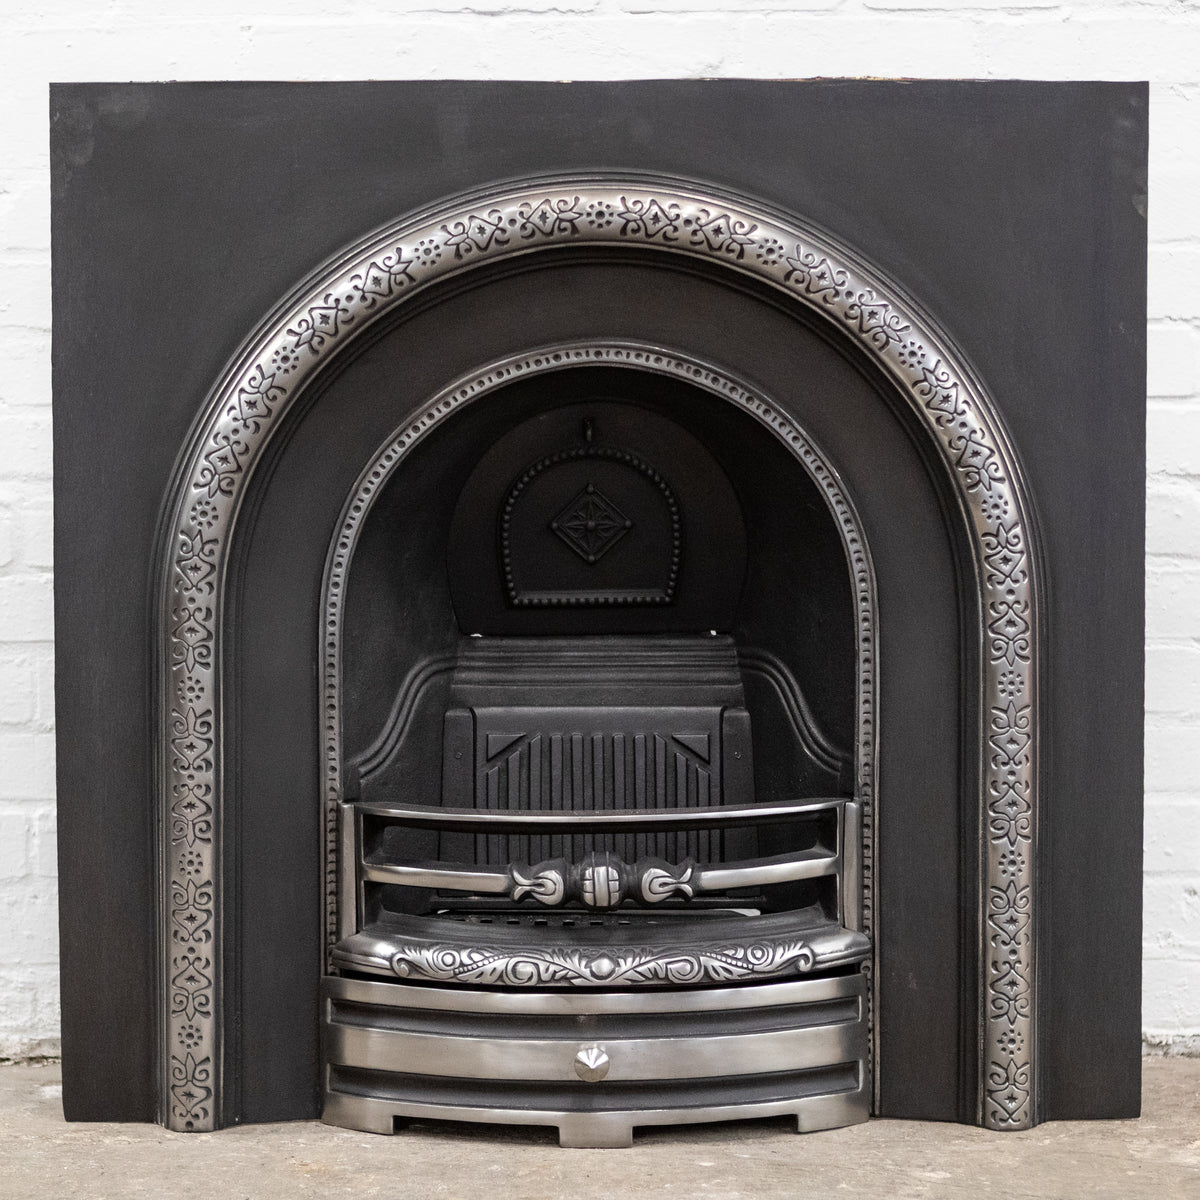 Reclaimed Victorian Style Arched Fireplace Insert | The Architectural Forum